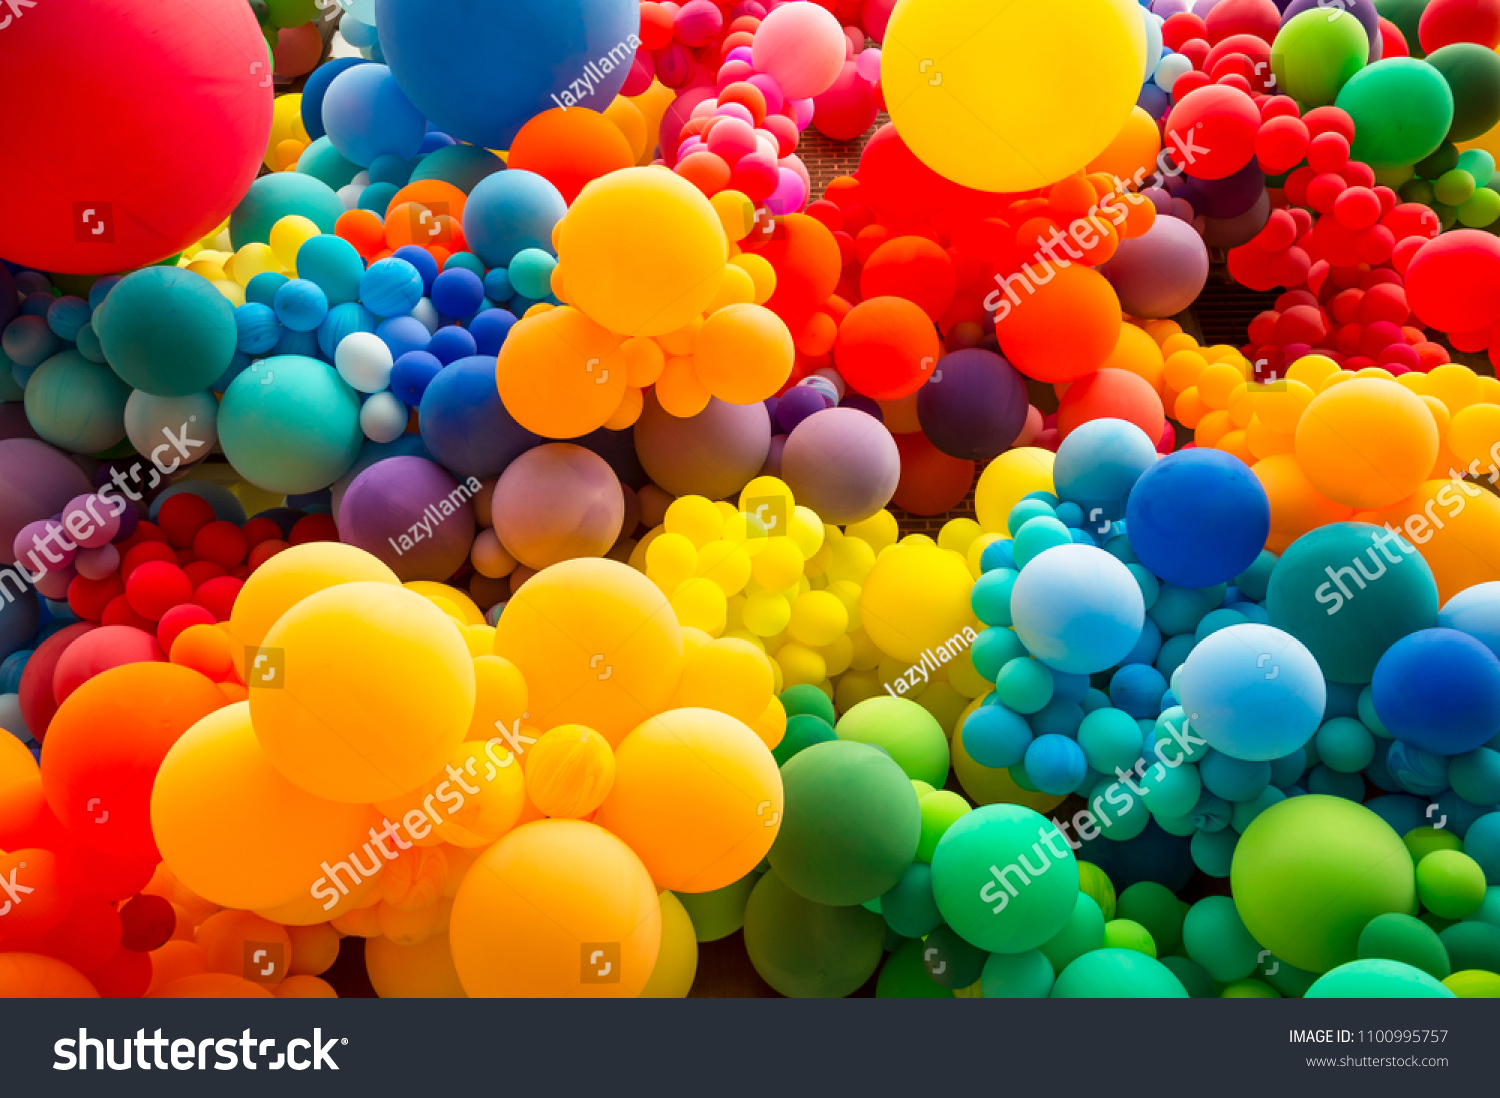 Bright abstract background of jumble of rainbow colored balloons celebrating gay pride #1100995757